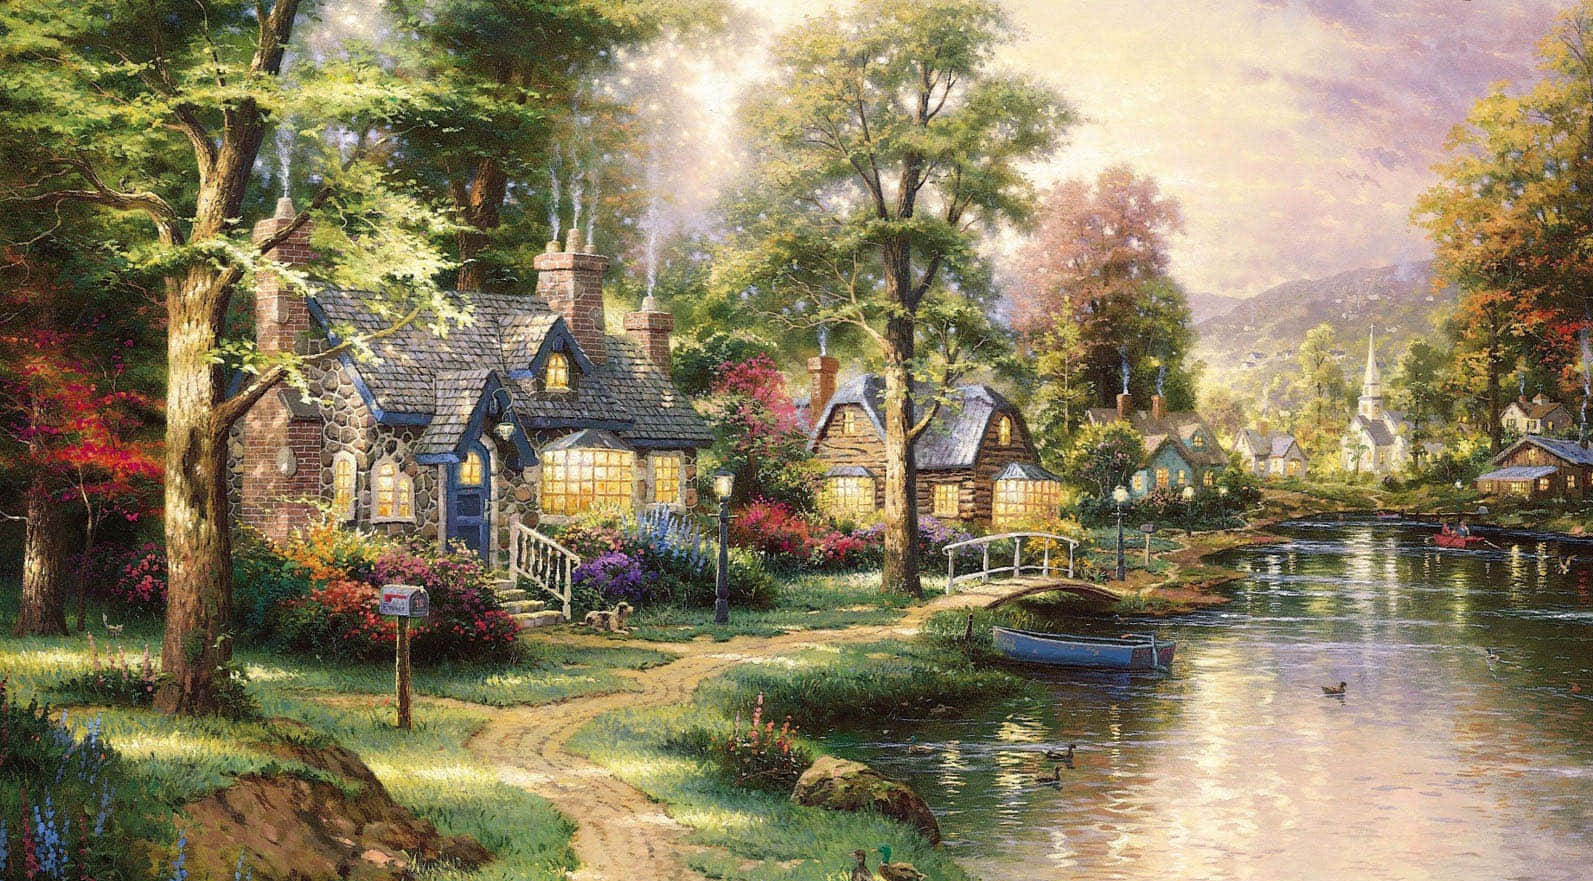 A Painting Of A Village By A River